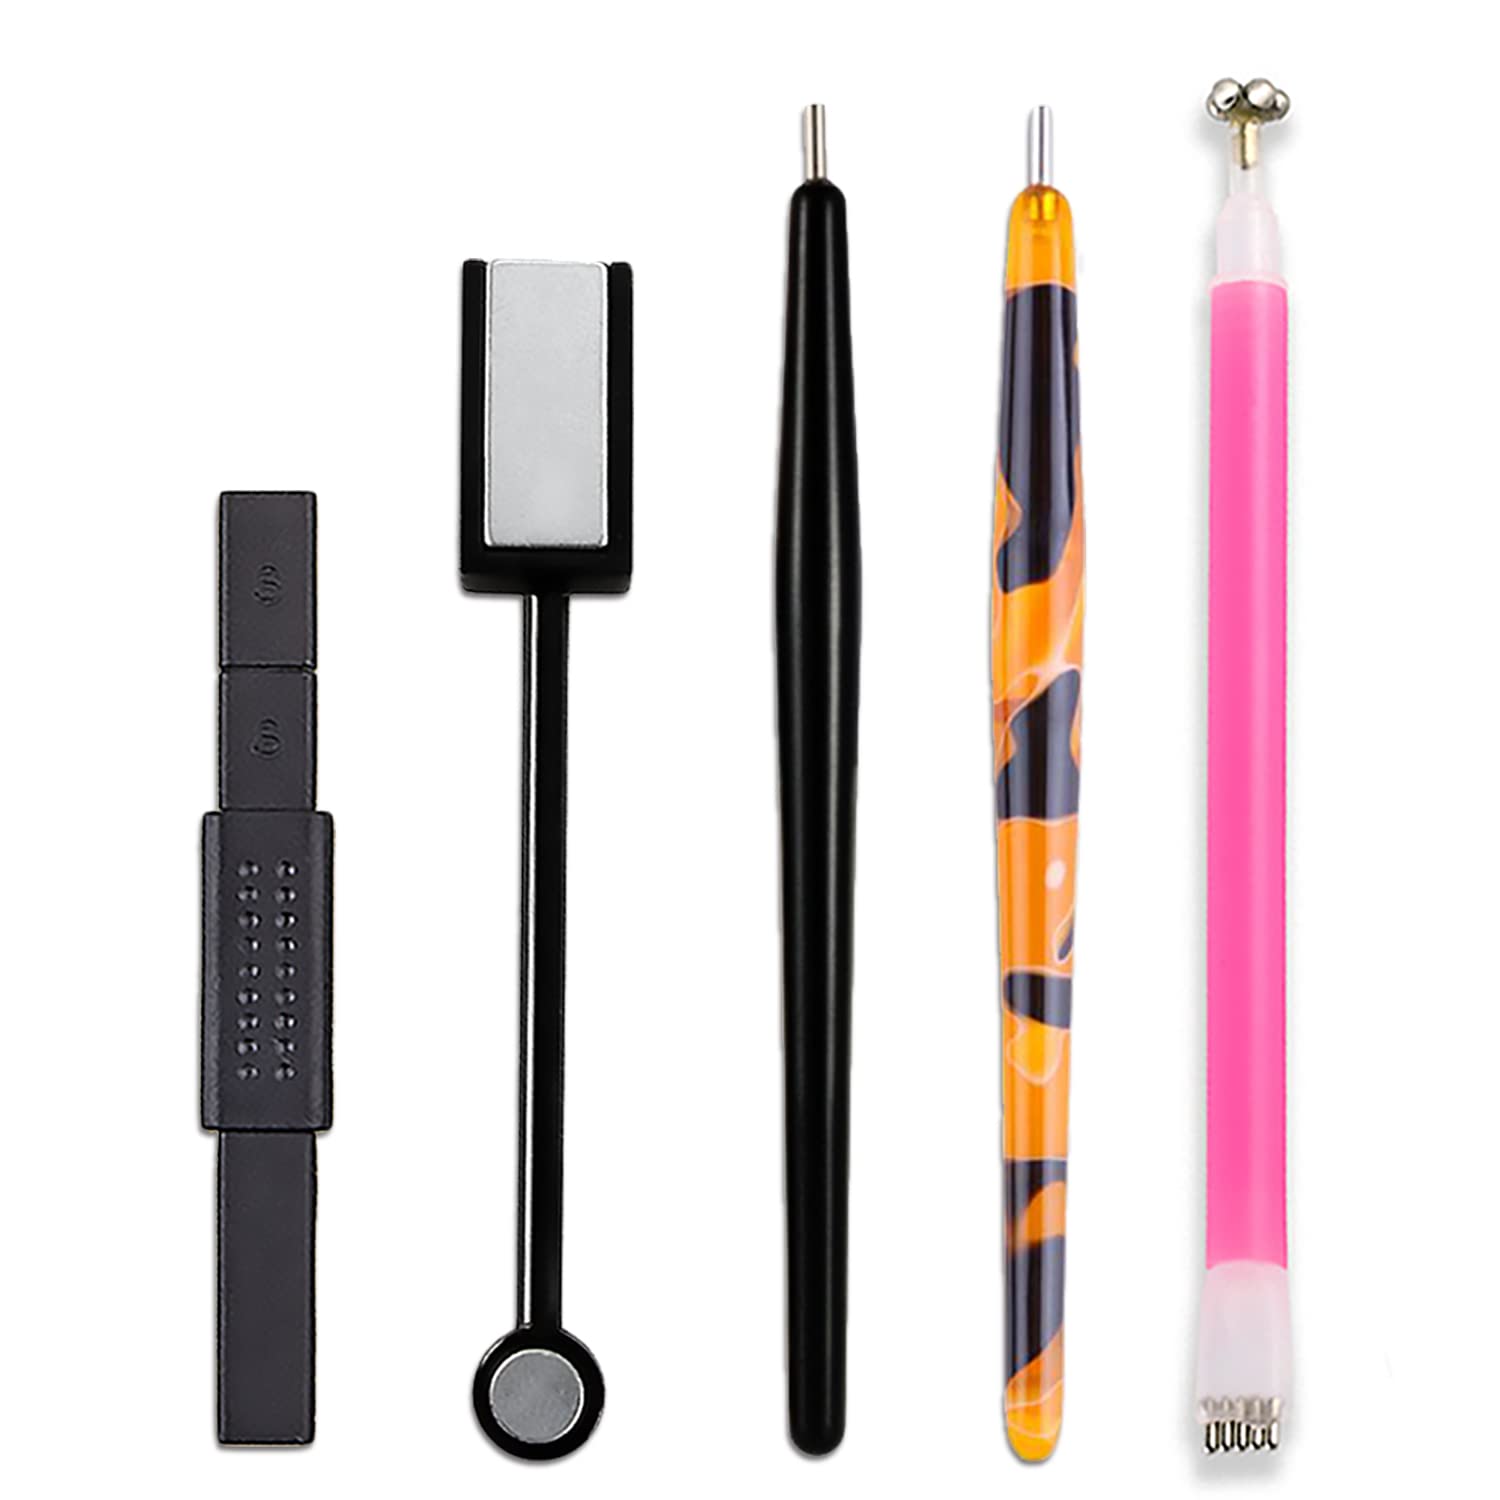 Accessories for 3D pens